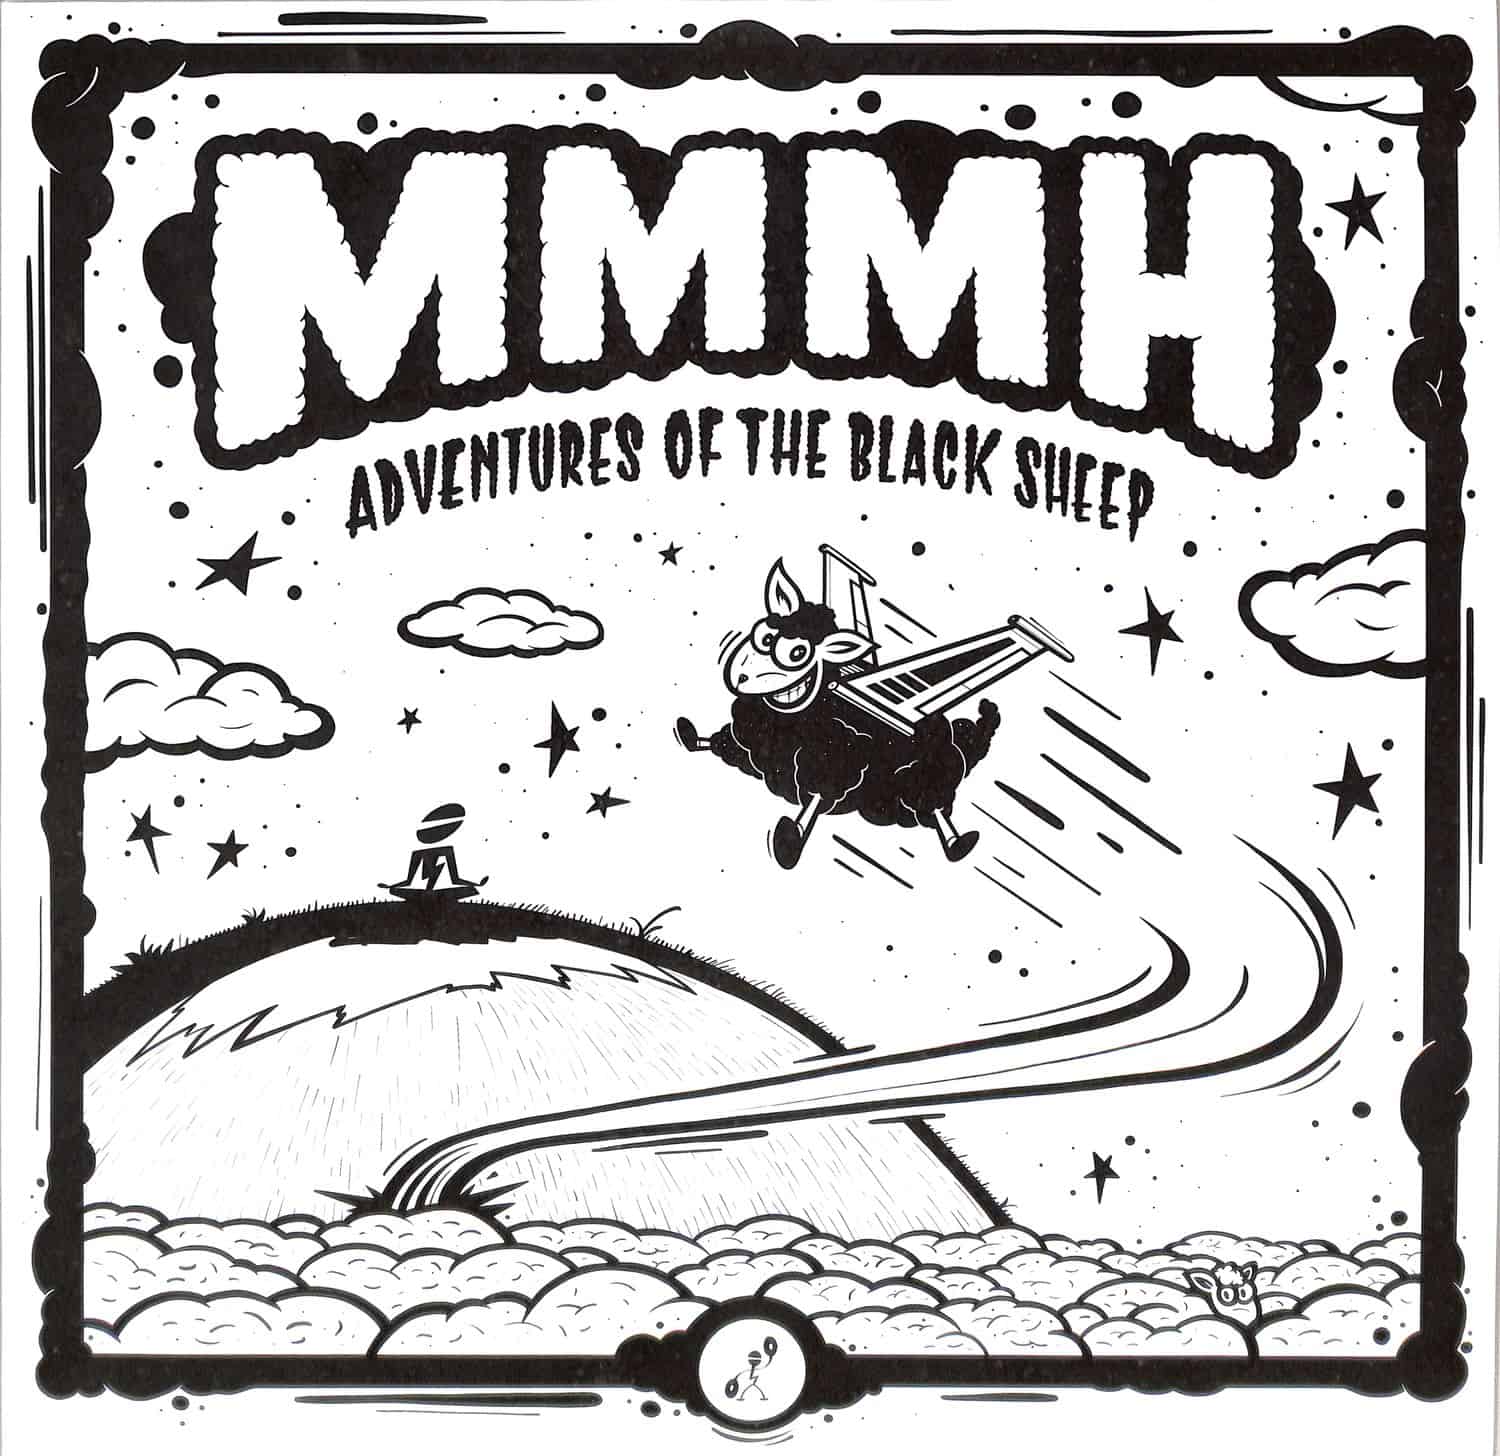 Mmmh - ADVENTURES OF THE BLACK SHEEP